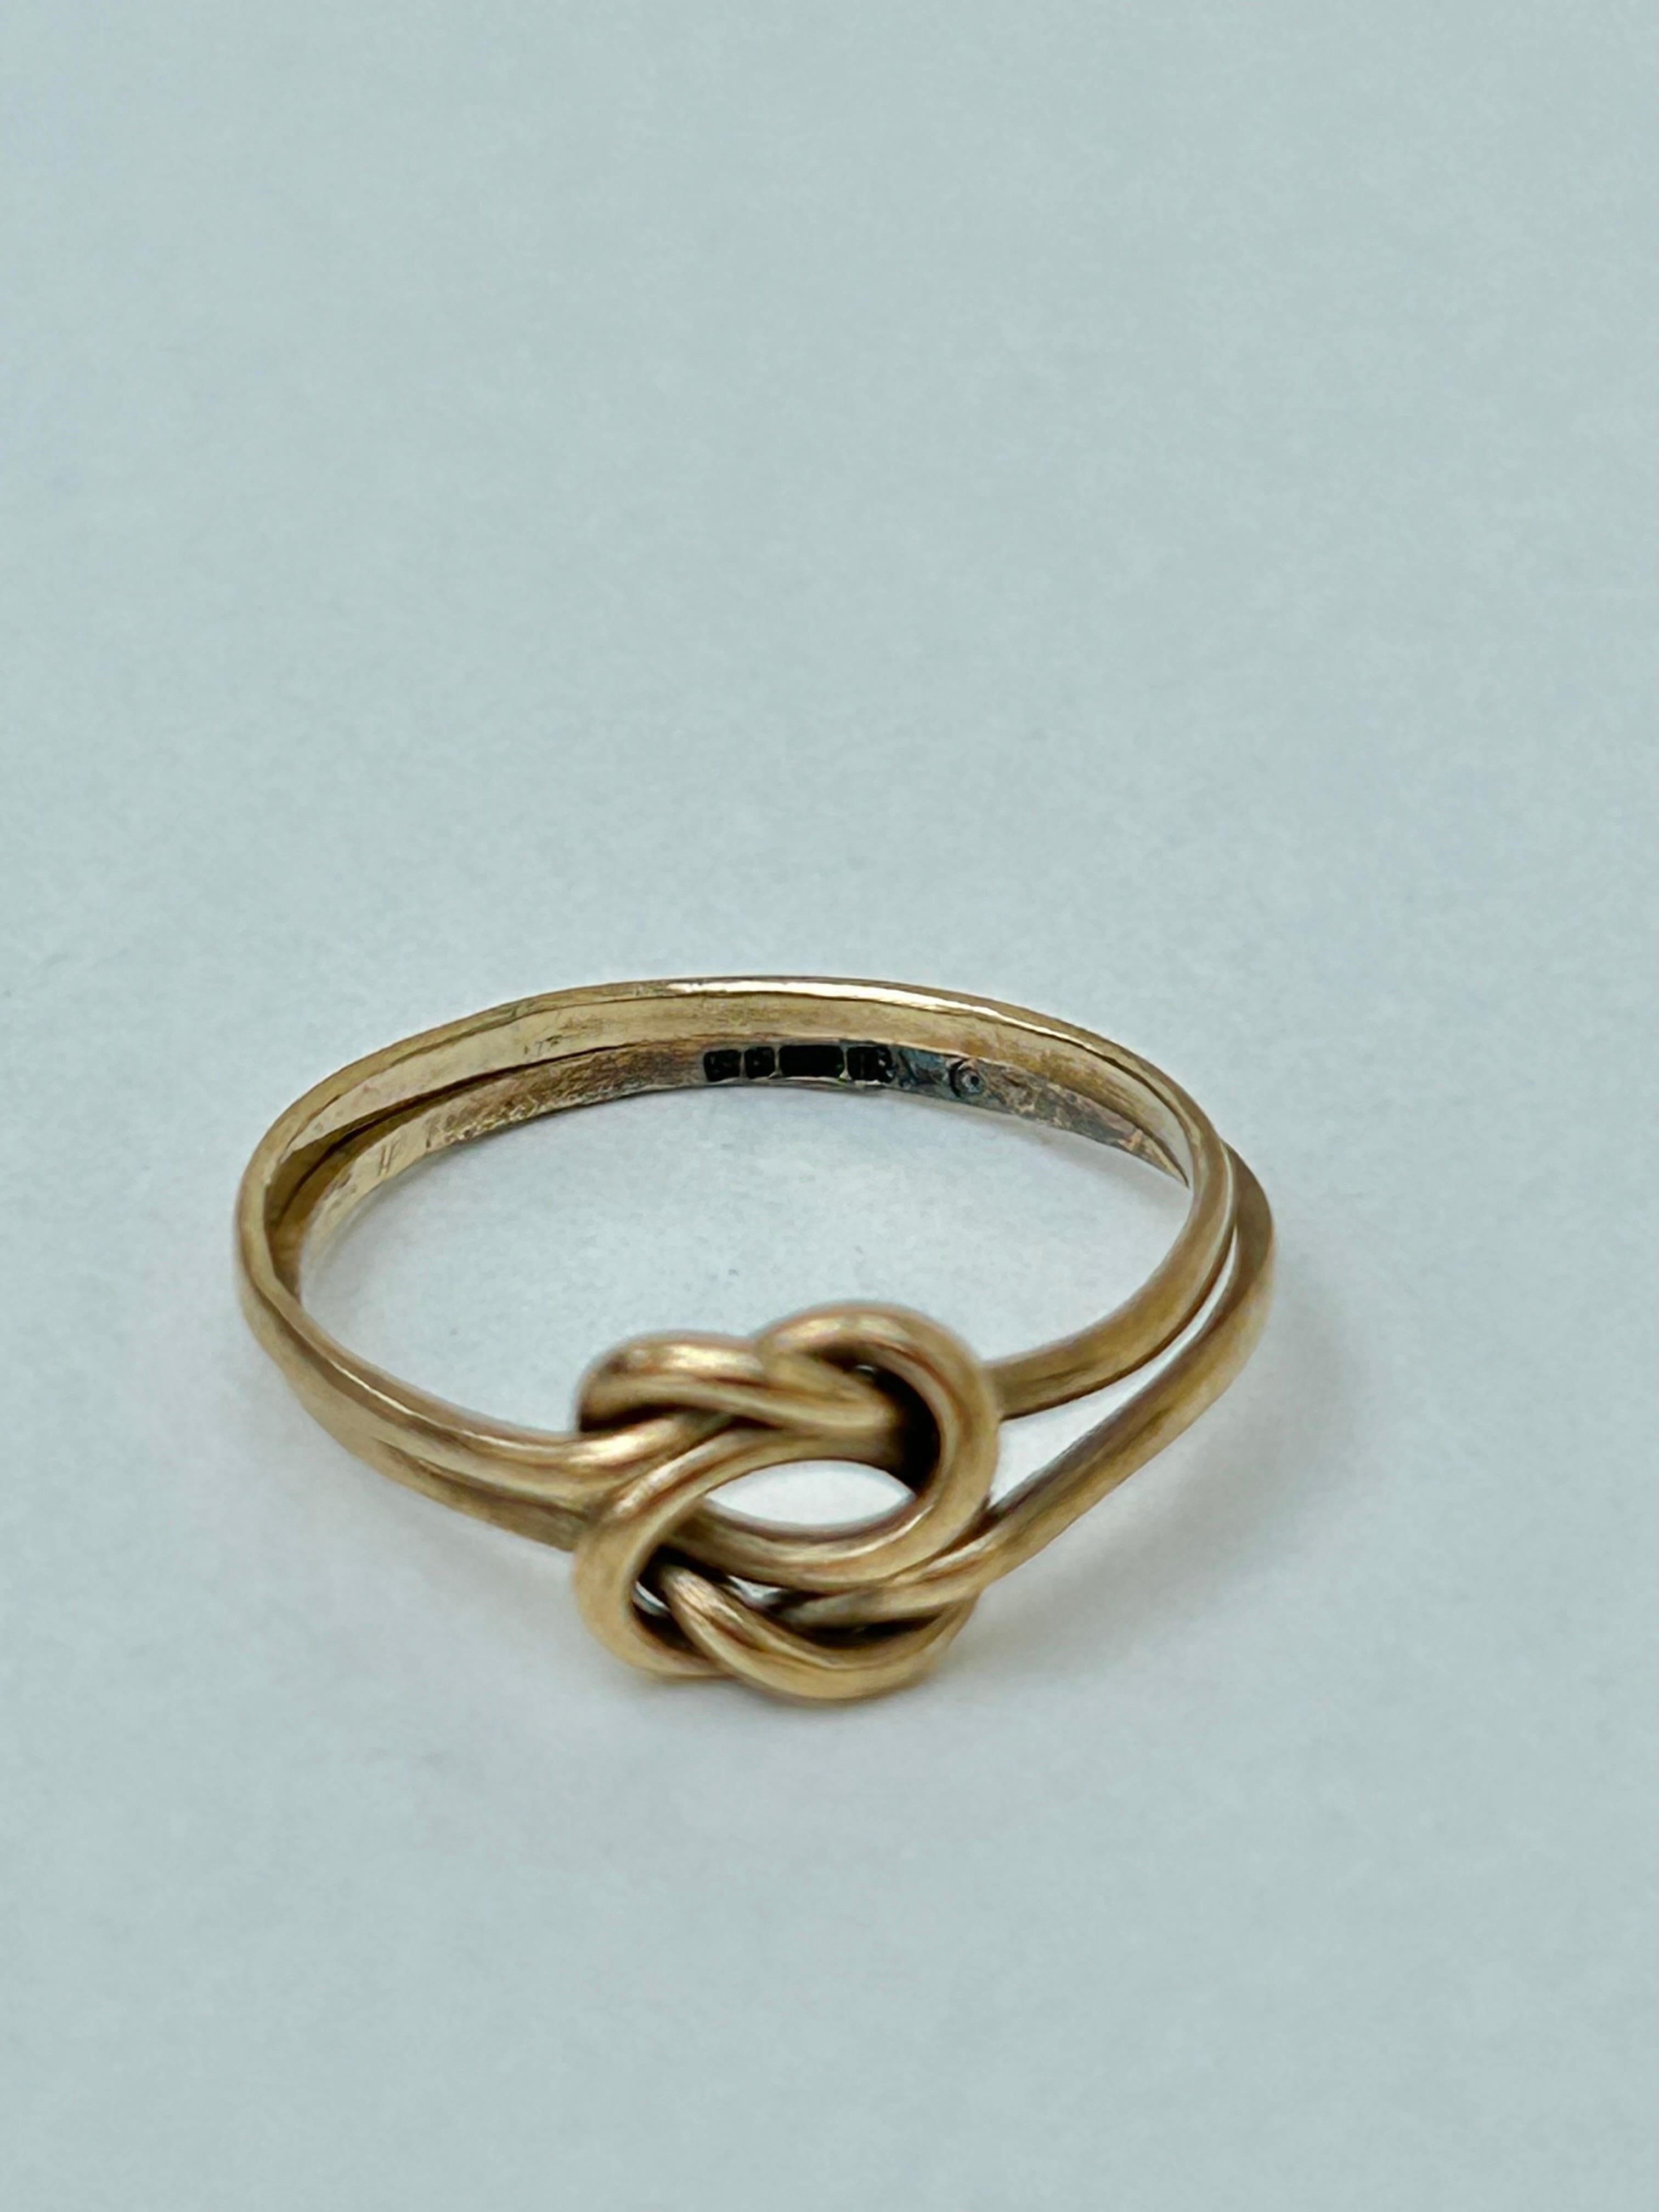 Sweet 9 Carat Yellow Gold Vintage Lovers Knot Puzzle Ring In Good Condition For Sale In Chipping Campden, GB